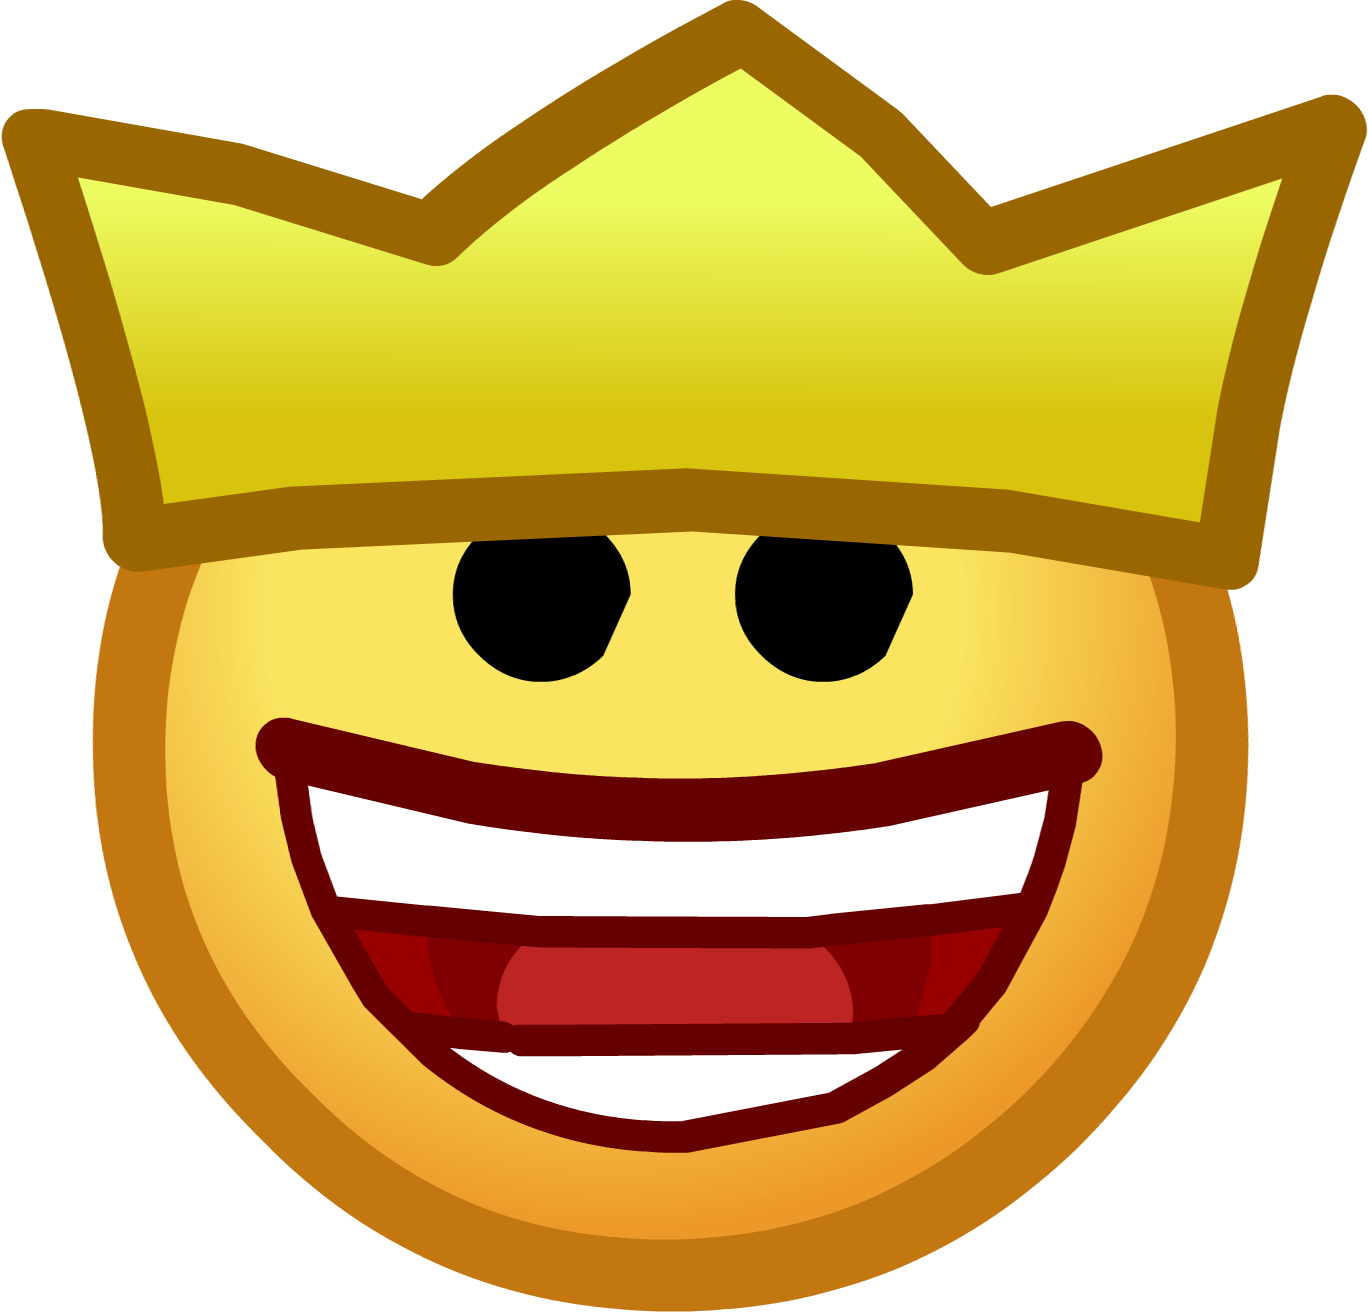 Image - King Emote.png - Club Penguin Wiki - The free, editable ...